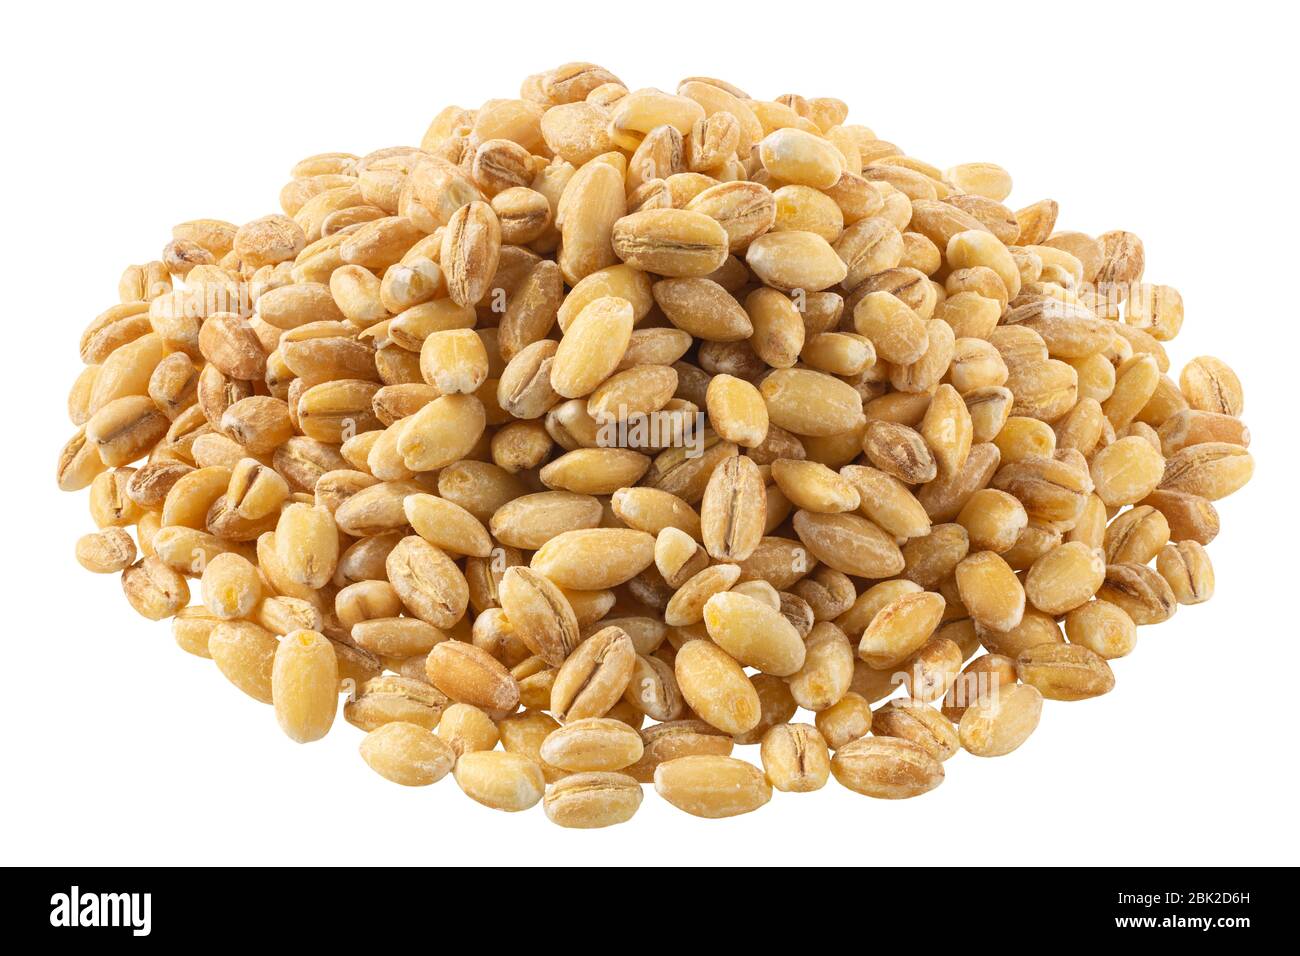 Pile of uncooked pearl barley, a wholegrain cereal, isolated Stock Photo